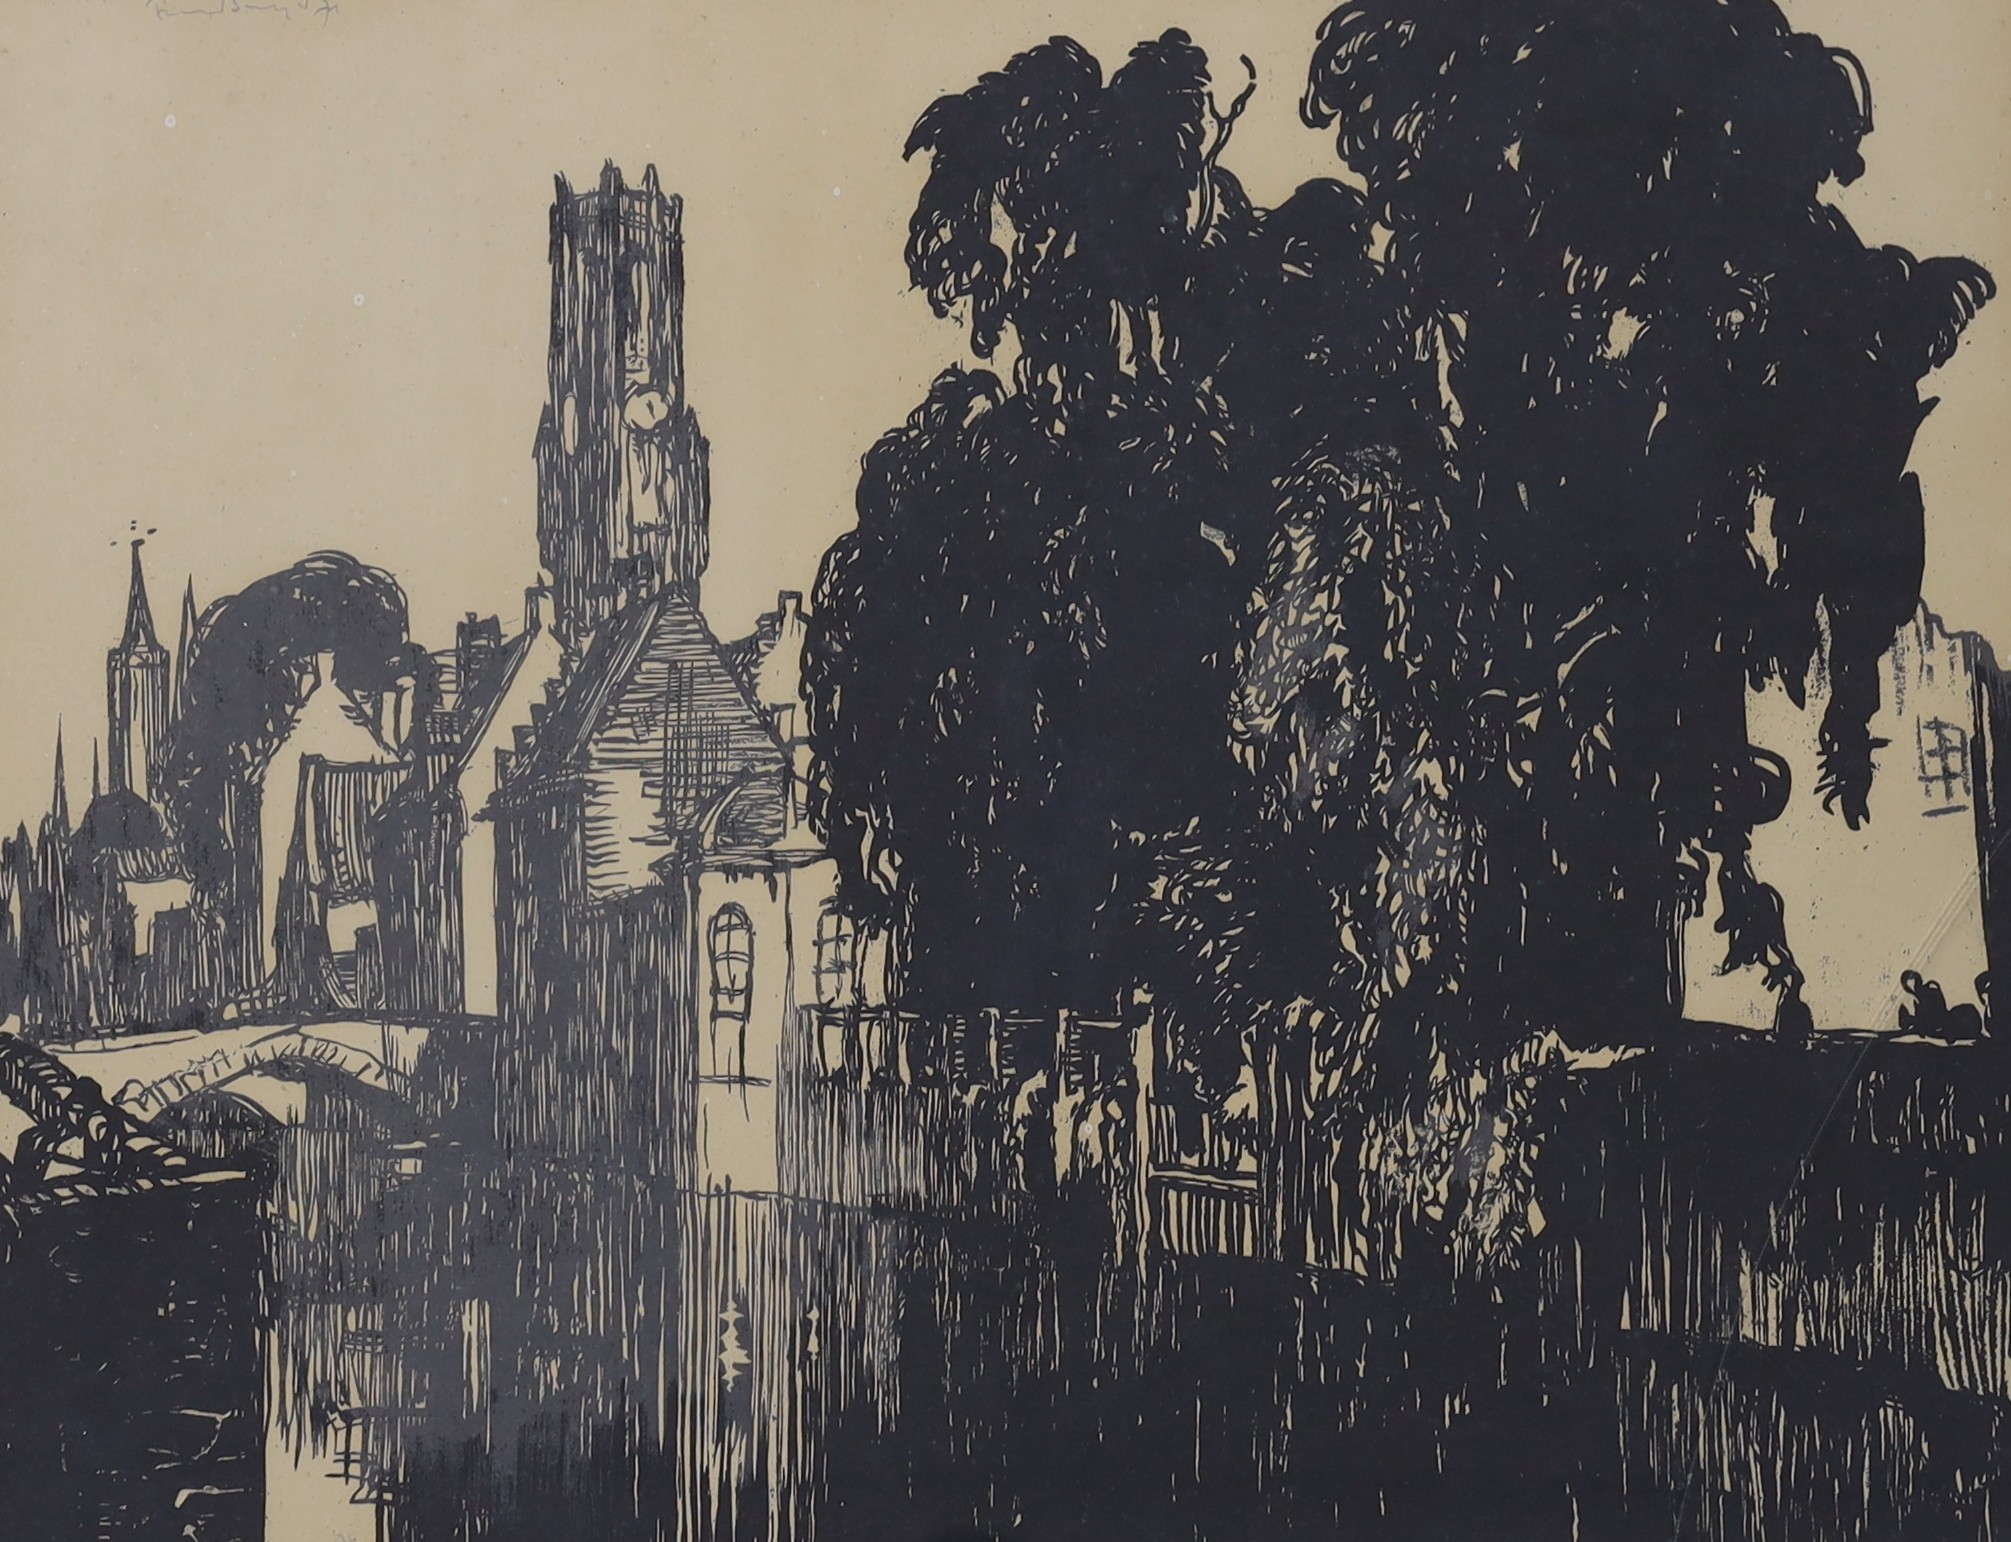 Sir Frank Brangwyn (1867-1956), lithograph, 'The Belfry, Bruges', signed in pencil, 36 x 49cm